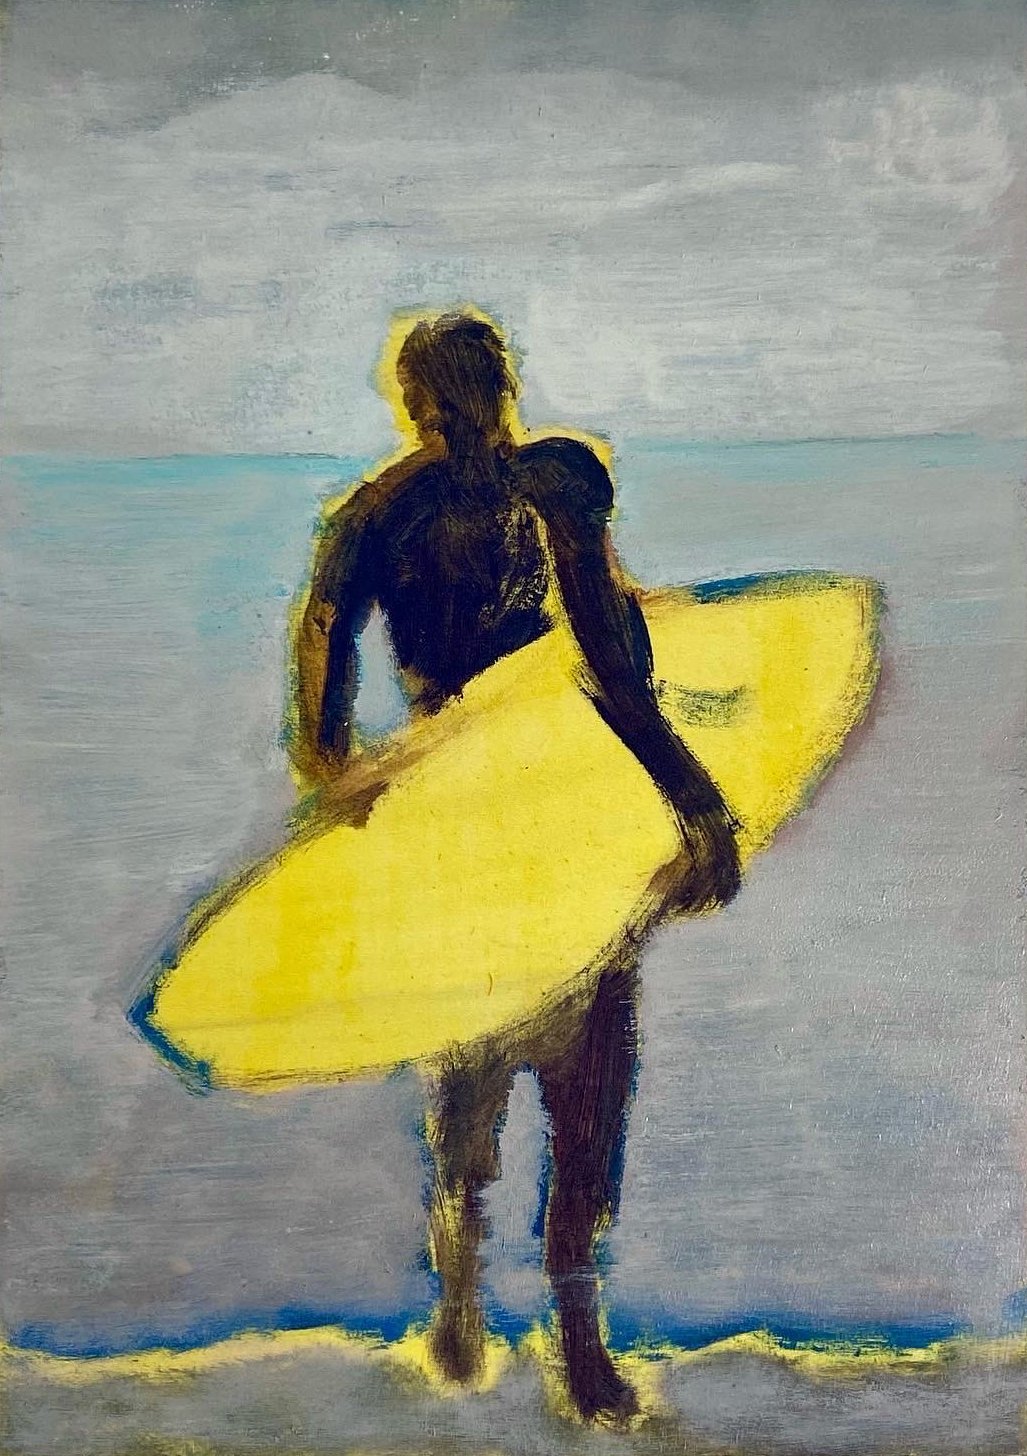 Surfer, Early Morning, 2020